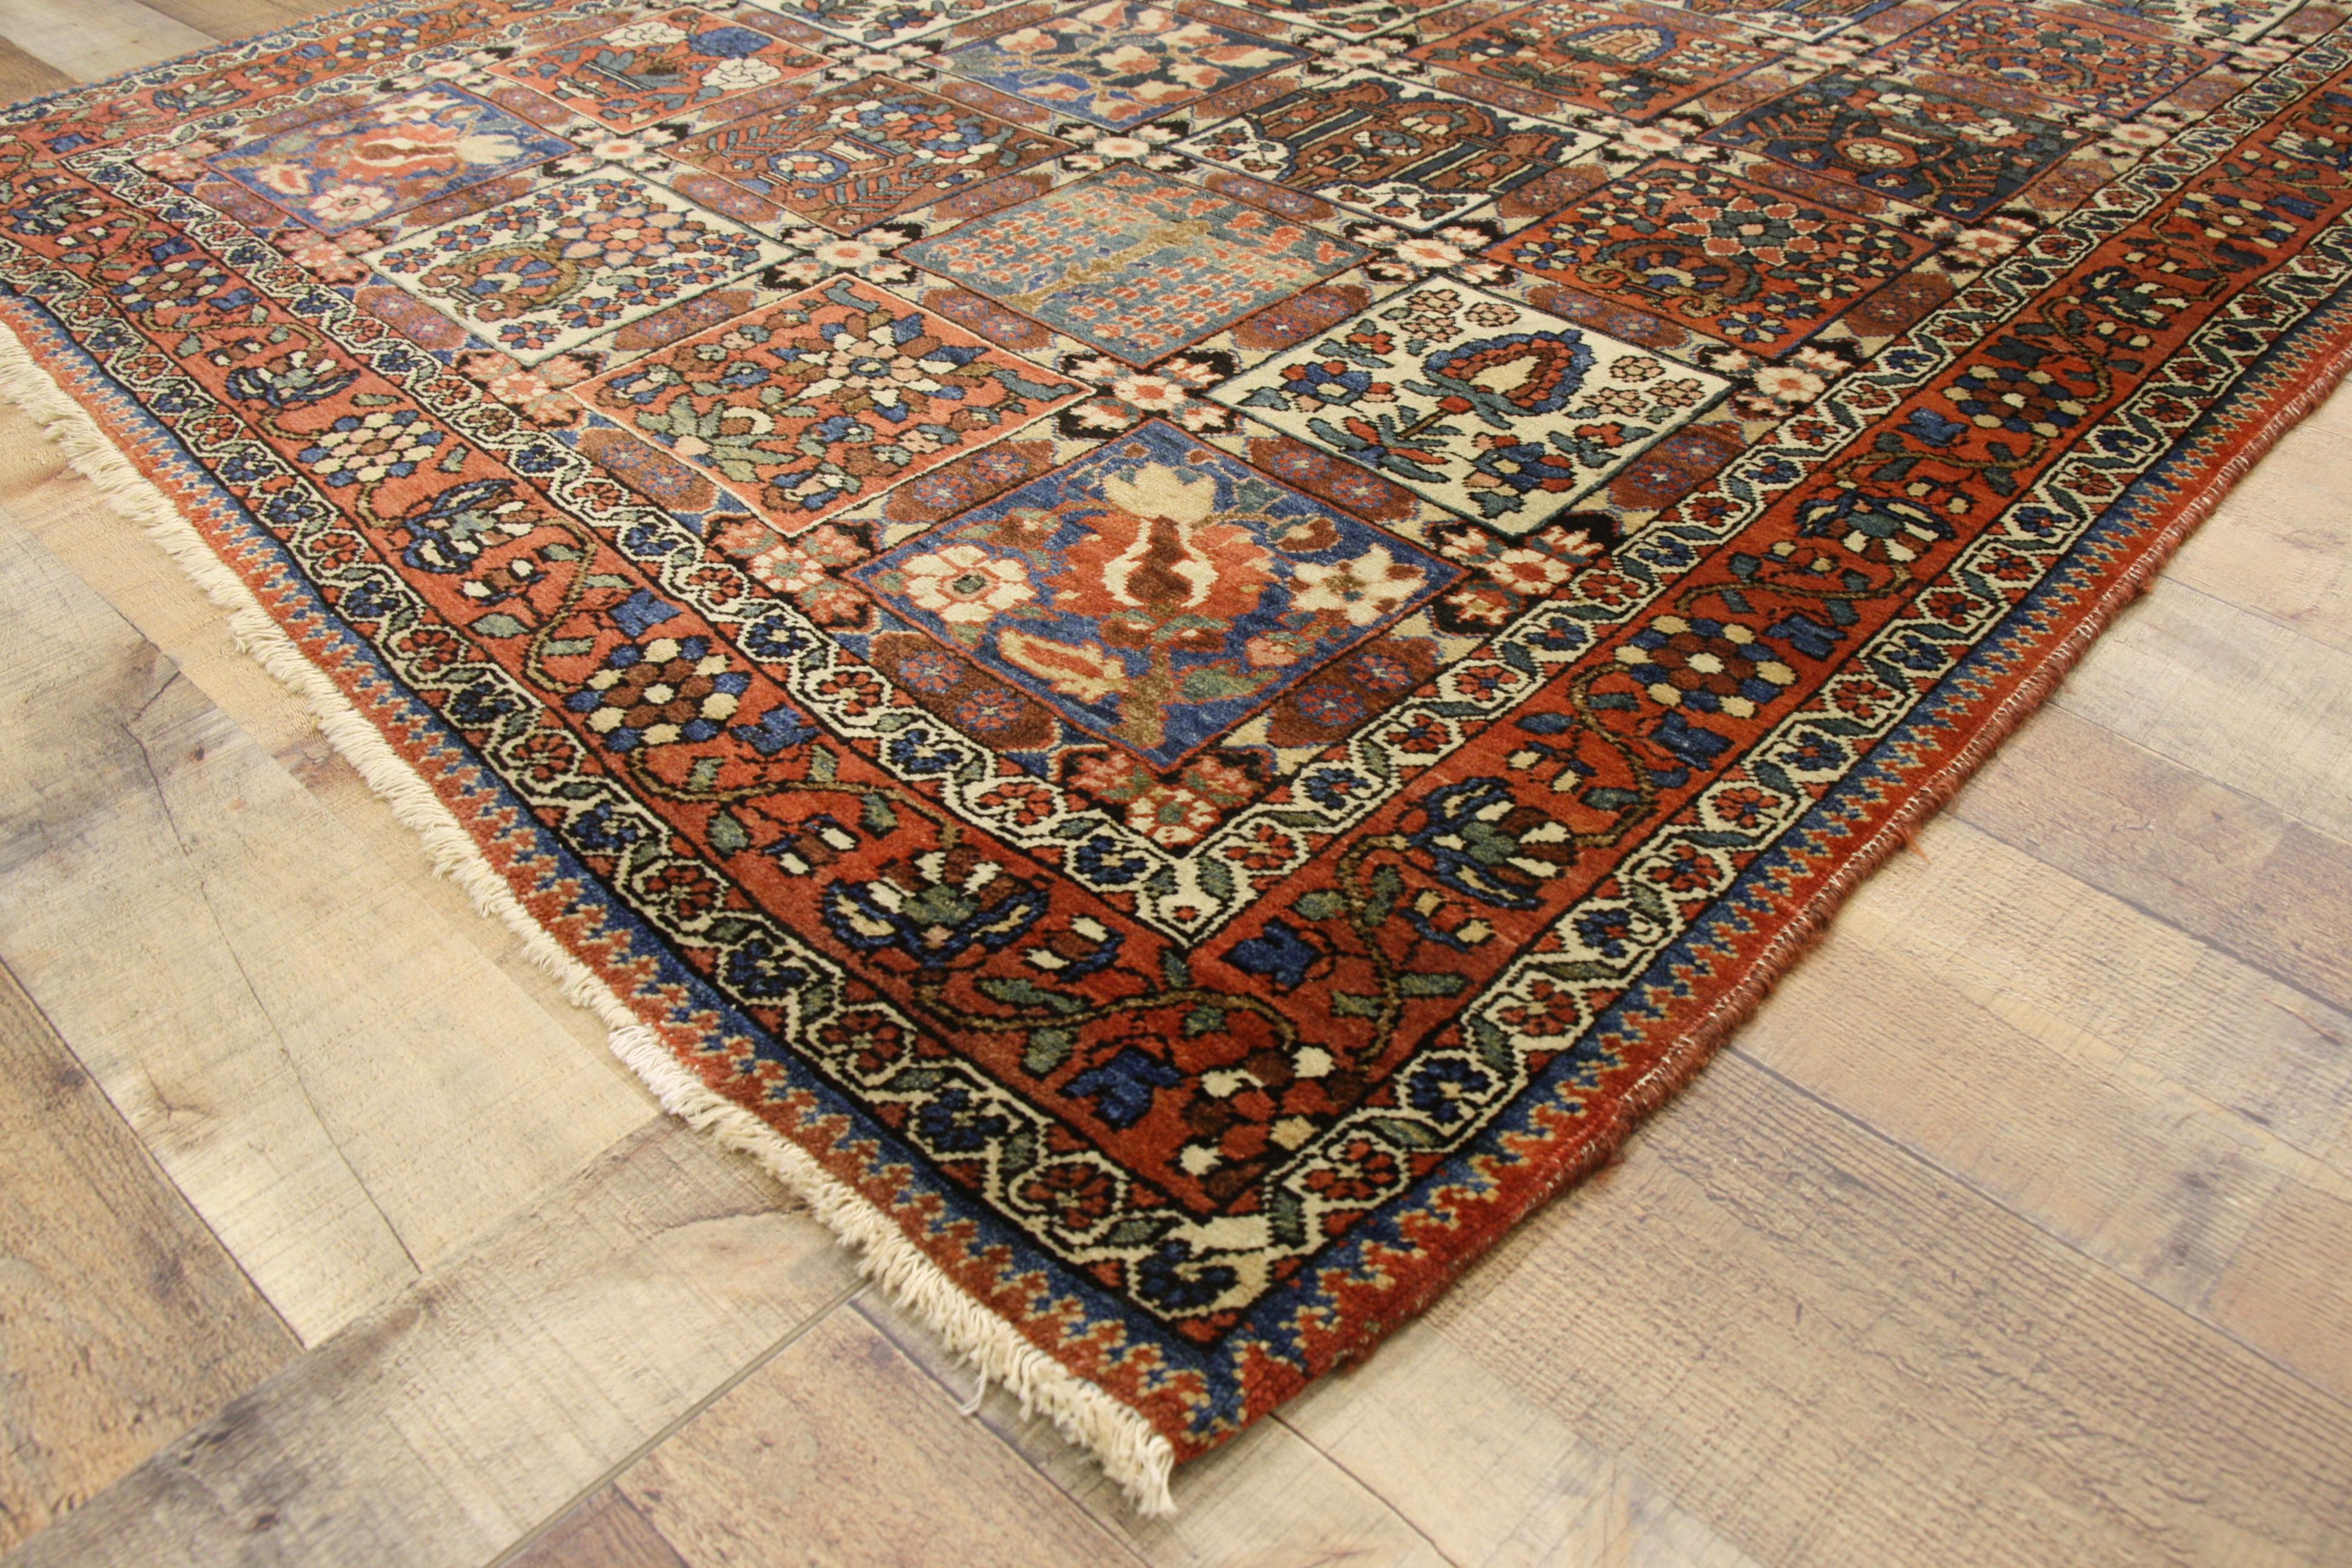 Wool Rustic Style Antique Persian Bakhtiari Rug with Four Seasons Garden Design For Sale